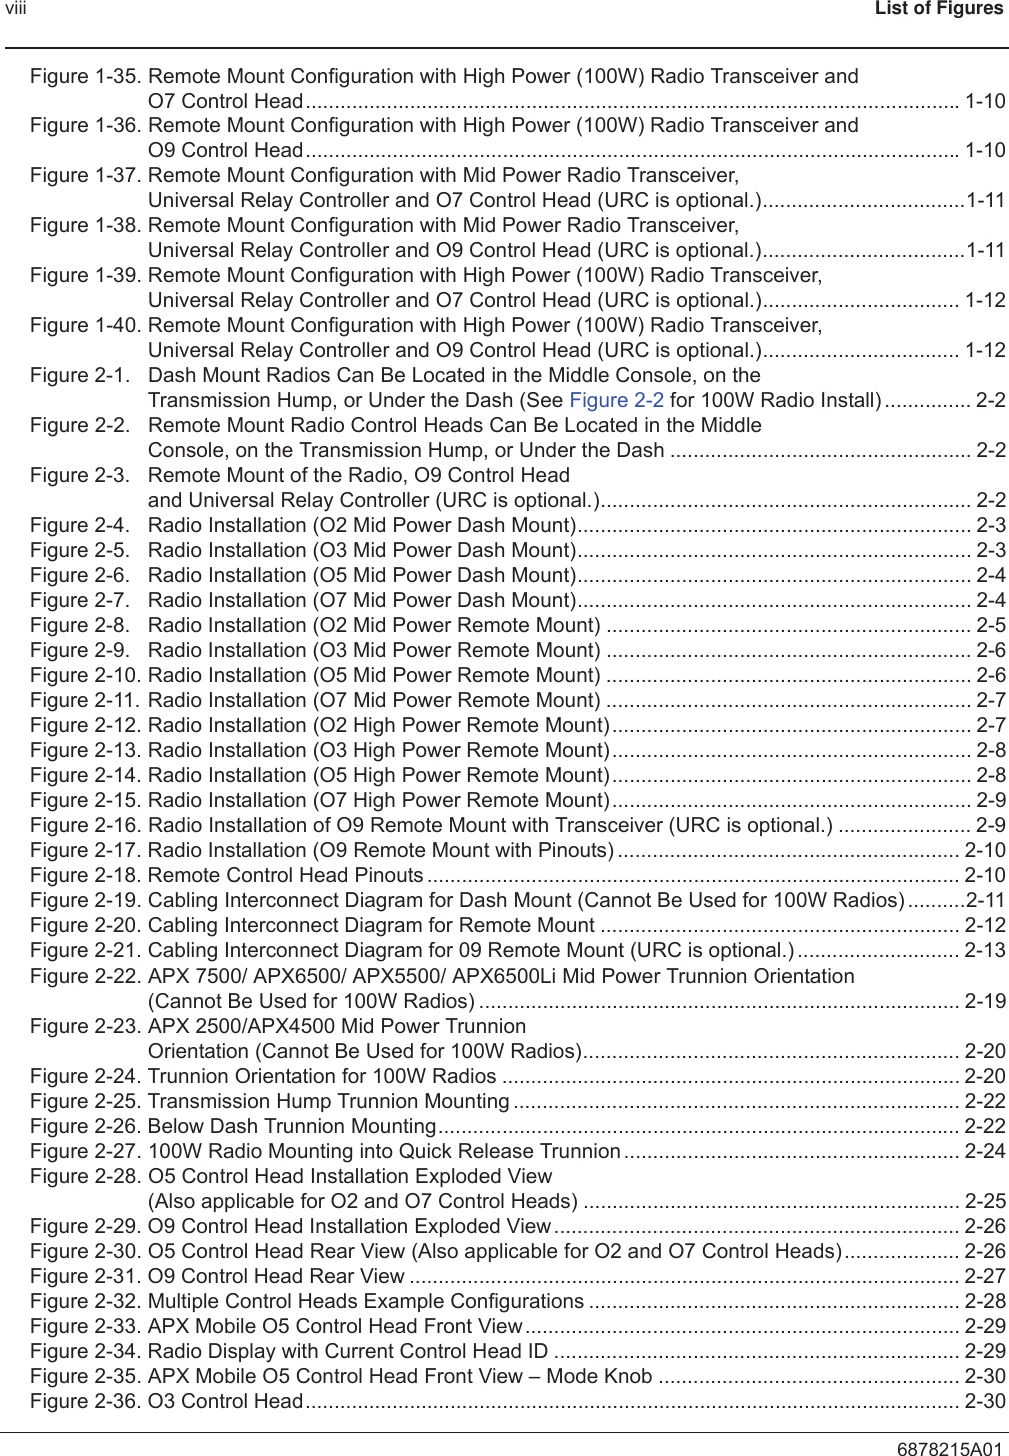 viii List of Figures6878215A01Figure 1-35. Remote Mount Configuration with High Power (100W) Radio Transceiver and O7 Control Head.................................................................................................................1-10Figure 1-36. Remote Mount Configuration with High Power (100W) Radio Transceiver and O9 Control Head.................................................................................................................1-10Figure 1-37. Remote Mount Configuration with Mid Power Radio Transceiver, Universal Relay Controller and O7 Control Head (URC is optional.)...................................1-11Figure 1-38. Remote Mount Configuration with Mid Power Radio Transceiver, Universal Relay Controller and O9 Control Head (URC is optional.)...................................1-11Figure 1-39. Remote Mount Configuration with High Power (100W) Radio Transceiver,Universal Relay Controller and O7 Control Head (URC is optional.).................................. 1-12Figure 1-40. Remote Mount Configuration with High Power (100W) Radio Transceiver,Universal Relay Controller and O9 Control Head (URC is optional.).................................. 1-12Figure 2-1. Dash Mount Radios Can Be Located in the Middle Console, on theTransmission Hump, or Under the Dash (See Figure 2-2 for 100W Radio Install) ............... 2-2Figure 2-2. Remote Mount Radio Control Heads Can Be Located in the MiddleConsole, on the Transmission Hump, or Under the Dash .................................................... 2-2Figure 2-3. Remote Mount of the Radio, O9 Control Headand Universal Relay Controller (URC is optional.)................................................................ 2-2Figure 2-4. Radio Installation (O2 Mid Power Dash Mount).................................................................... 2-3Figure 2-5. Radio Installation (O3 Mid Power Dash Mount).................................................................... 2-3Figure 2-6. Radio Installation (O5 Mid Power Dash Mount).................................................................... 2-4Figure 2-7. Radio Installation (O7 Mid Power Dash Mount).................................................................... 2-4Figure 2-8. Radio Installation (O2 Mid Power Remote Mount) ............................................................... 2-5Figure 2-9. Radio Installation (O3 Mid Power Remote Mount) ............................................................... 2-6Figure 2-10. Radio Installation (O5 Mid Power Remote Mount) ............................................................... 2-6Figure 2-11. Radio Installation (O7 Mid Power Remote Mount) ............................................................... 2-7Figure 2-12. Radio Installation (O2 High Power Remote Mount).............................................................. 2-7Figure 2-13. Radio Installation (O3 High Power Remote Mount).............................................................. 2-8Figure 2-14. Radio Installation (O5 High Power Remote Mount).............................................................. 2-8Figure 2-15. Radio Installation (O7 High Power Remote Mount).............................................................. 2-9Figure 2-16. Radio Installation of O9 Remote Mount with Transceiver (URC is optional.) ....................... 2-9Figure 2-17. Radio Installation (O9 Remote Mount with Pinouts) ........................................................... 2-10Figure 2-18. Remote Control Head Pinouts ............................................................................................ 2-10Figure 2-19. Cabling Interconnect Diagram for Dash Mount (Cannot Be Used for 100W Radios) ..........2-11Figure 2-20. Cabling Interconnect Diagram for Remote Mount .............................................................. 2-12Figure 2-21. Cabling Interconnect Diagram for 09 Remote Mount (URC is optional.) ............................ 2-13Figure 2-22. APX 7500/ APX6500/ APX5500/ APX6500Li Mid Power Trunnion Orientation (Cannot Be Used for 100W Radios) ................................................................................... 2-19Figure 2-23. APX 2500/APX4500 Mid Power Trunnion Orientation (Cannot Be Used for 100W Radios)................................................................. 2-20Figure 2-24. Trunnion Orientation for 100W Radios ............................................................................... 2-20Figure 2-25. Transmission Hump Trunnion Mounting ............................................................................. 2-22Figure 2-26. Below Dash Trunnion Mounting.......................................................................................... 2-22Figure 2-27. 100W Radio Mounting into Quick Release Trunnion .......................................................... 2-24Figure 2-28. O5 Control Head Installation Exploded View (Also applicable for O2 and O7 Control Heads) ................................................................. 2-25Figure 2-29. O9 Control Head Installation Exploded View...................................................................... 2-26Figure 2-30. O5 Control Head Rear View (Also applicable for O2 and O7 Control Heads).................... 2-26Figure 2-31. O9 Control Head Rear View ............................................................................................... 2-27Figure 2-32. Multiple Control Heads Example Configurations ................................................................ 2-28Figure 2-33. APX Mobile O5 Control Head Front View........................................................................... 2-29Figure 2-34. Radio Display with Current Control Head ID ...................................................................... 2-29Figure 2-35. APX Mobile O5 Control Head Front View – Mode Knob .................................................... 2-30Figure 2-36. O3 Control Head................................................................................................................. 2-30